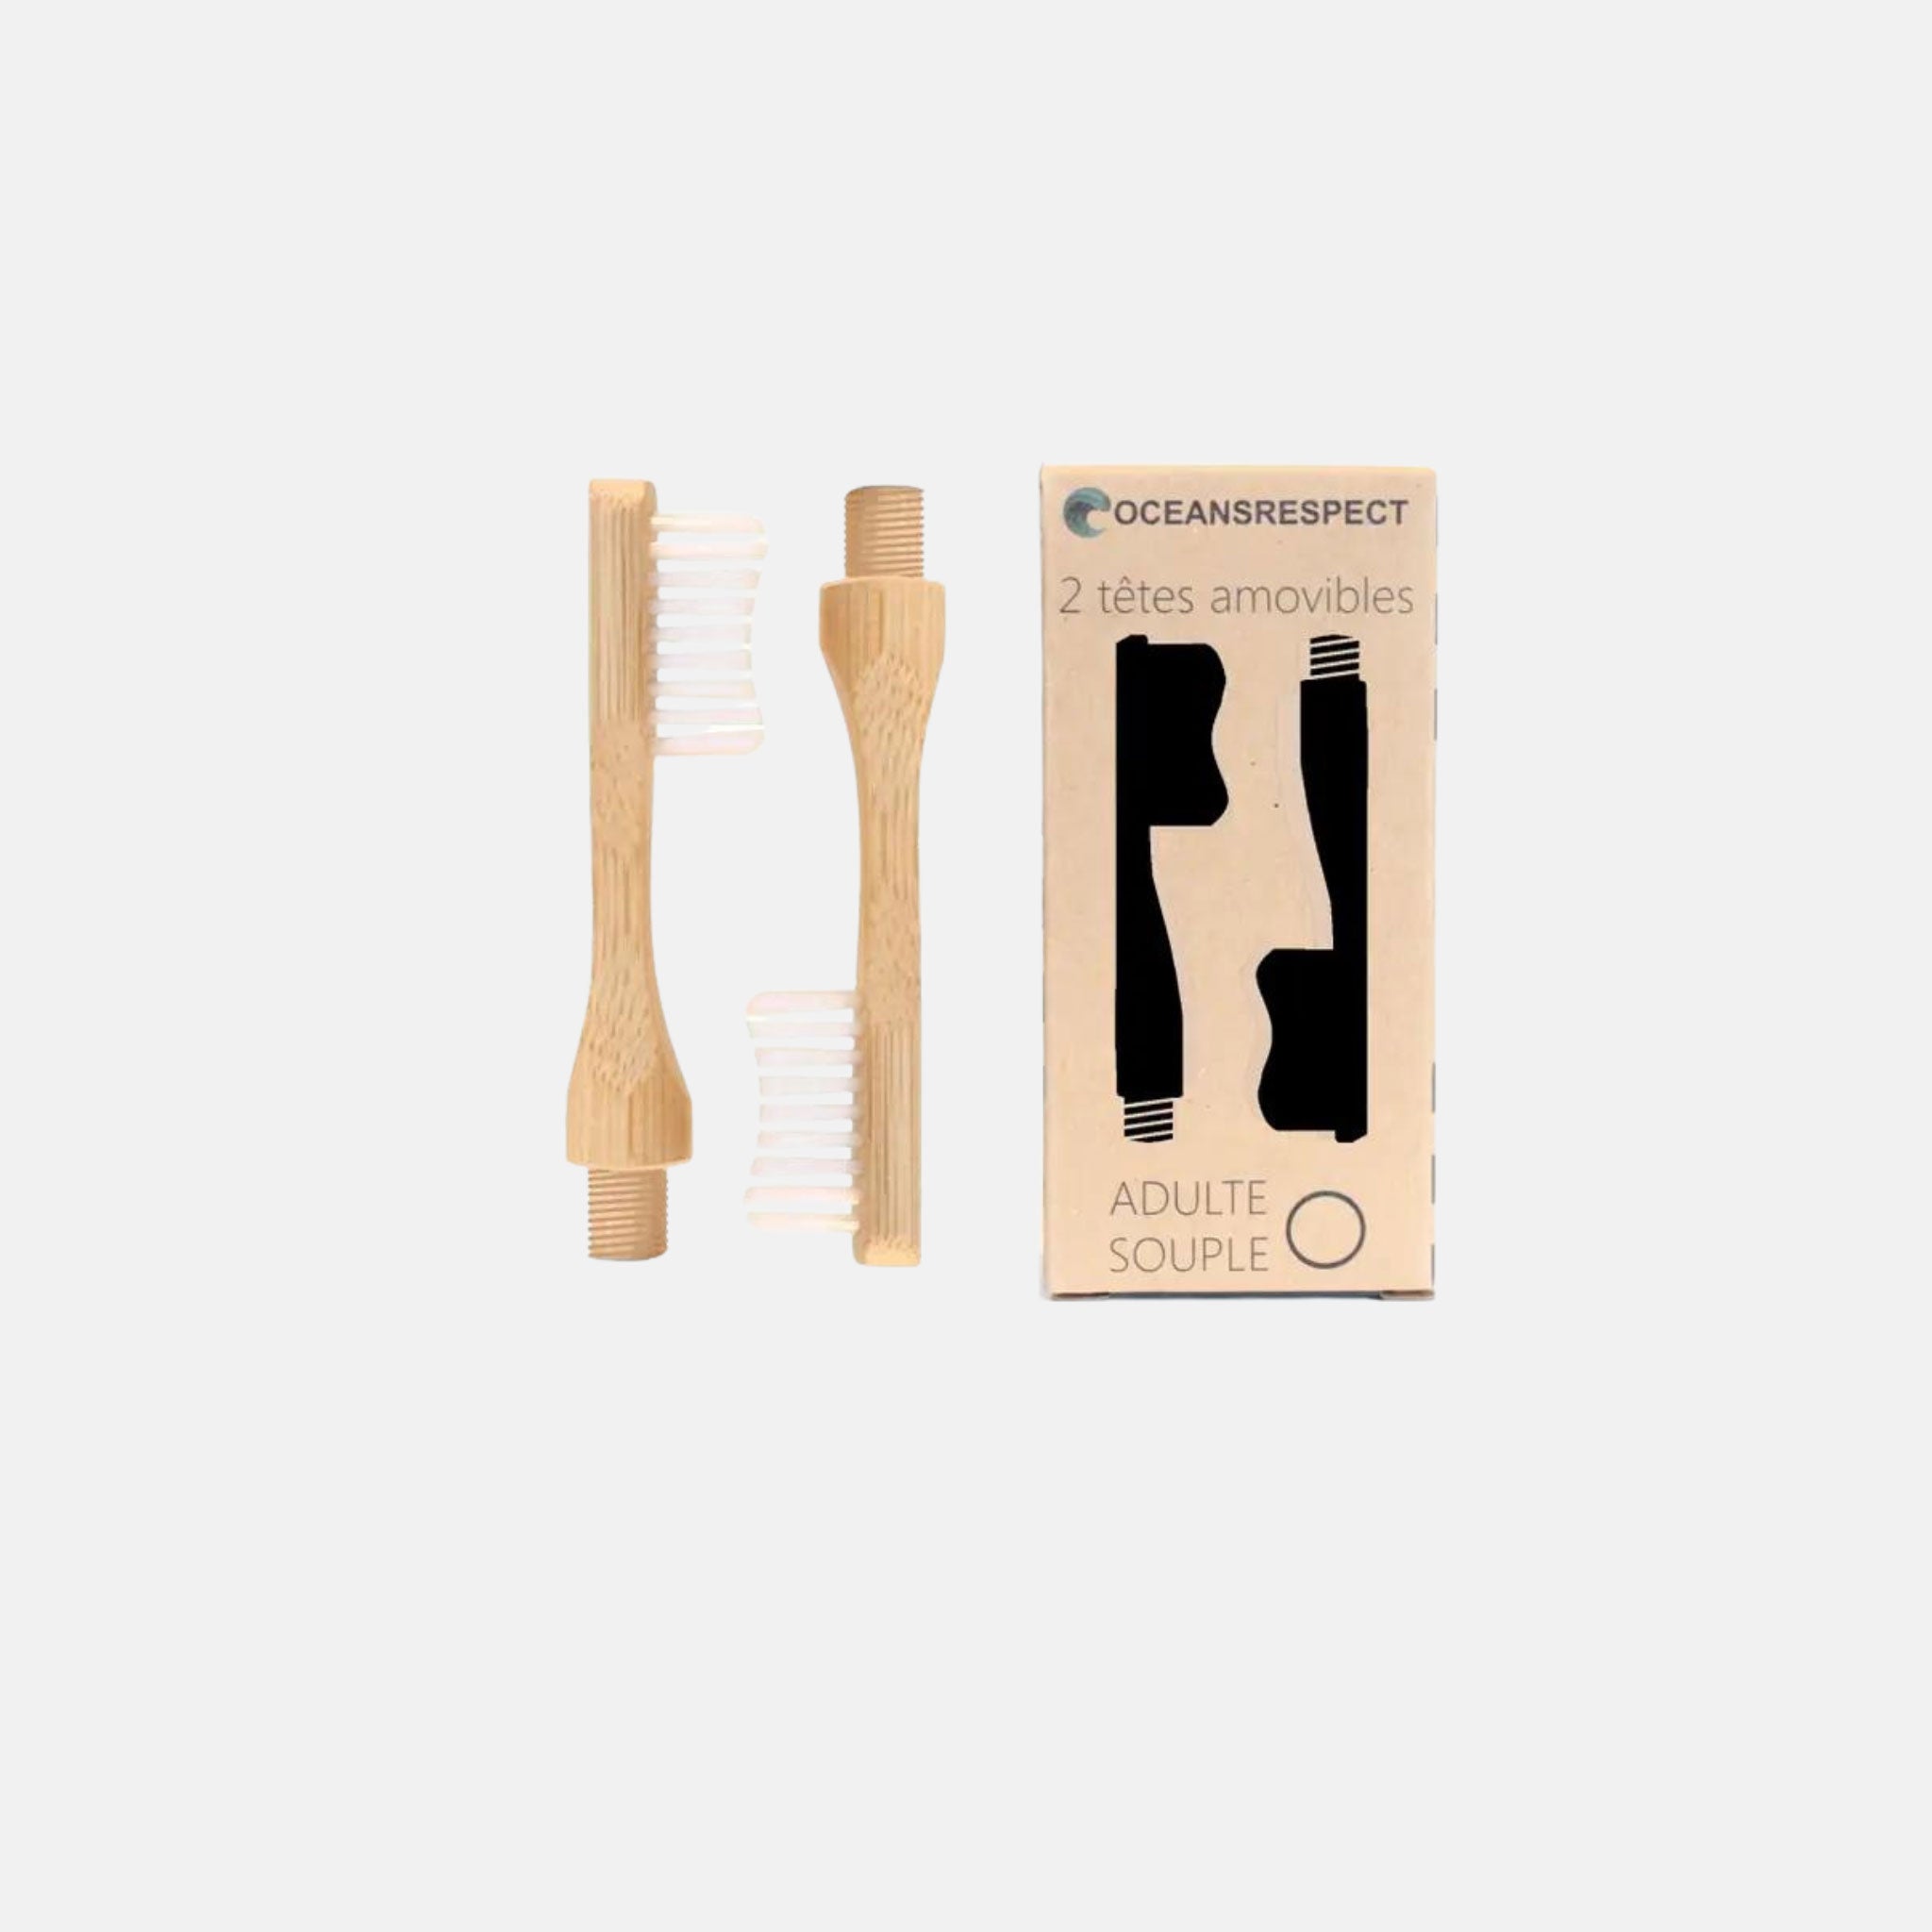 Set of two interchangeable bamboo toothbrush heads